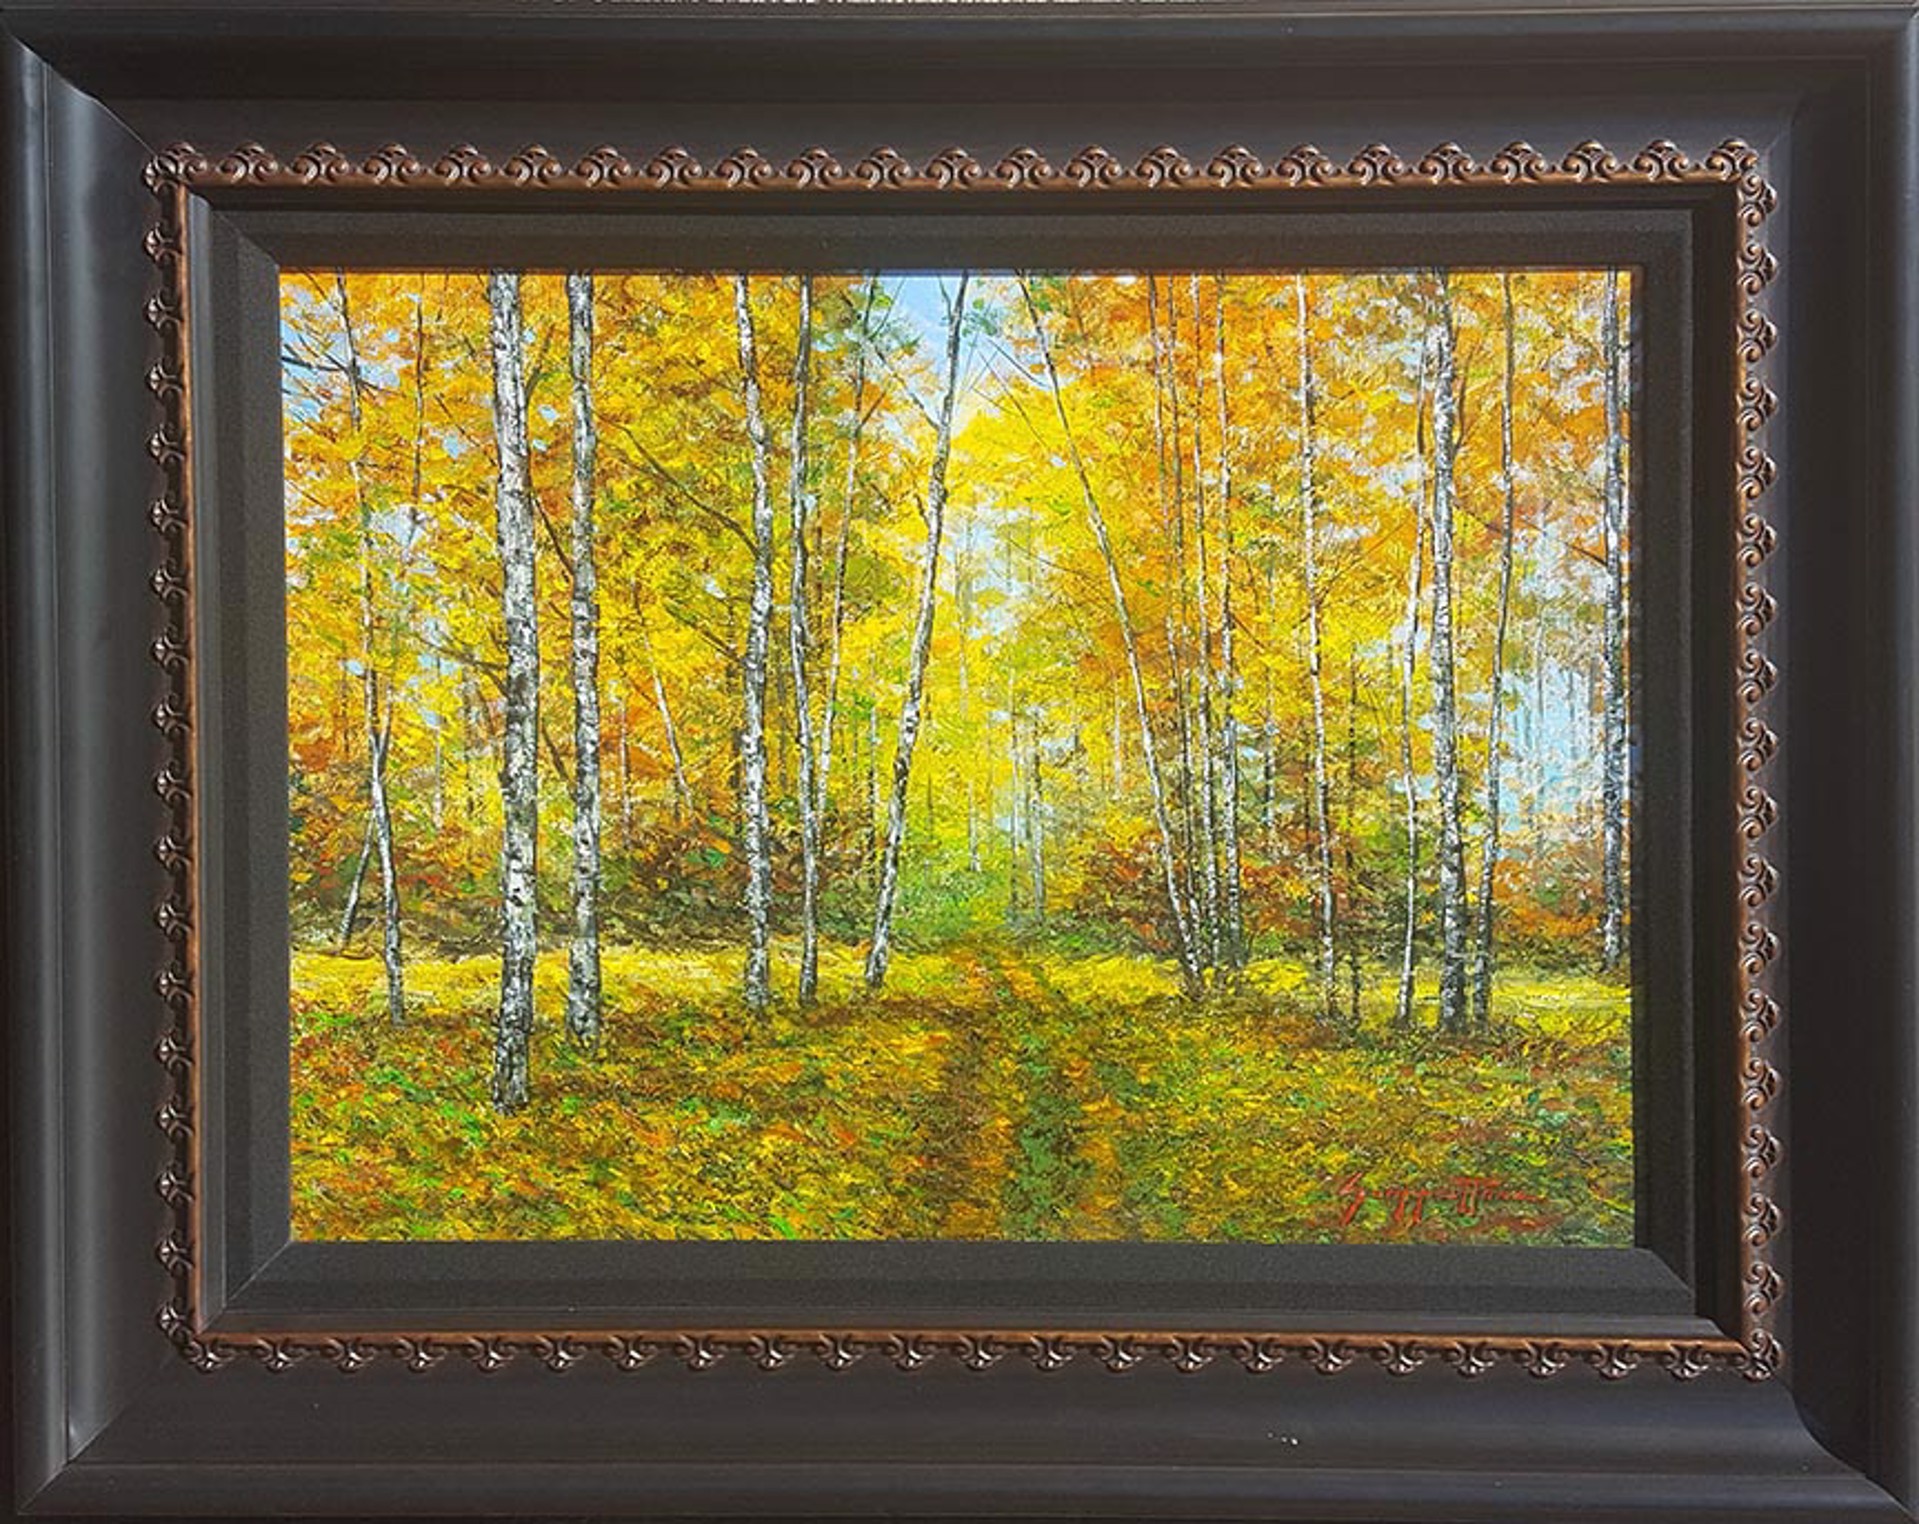 James Scoppettone, A birch path, landscape paintings, fall , leaves